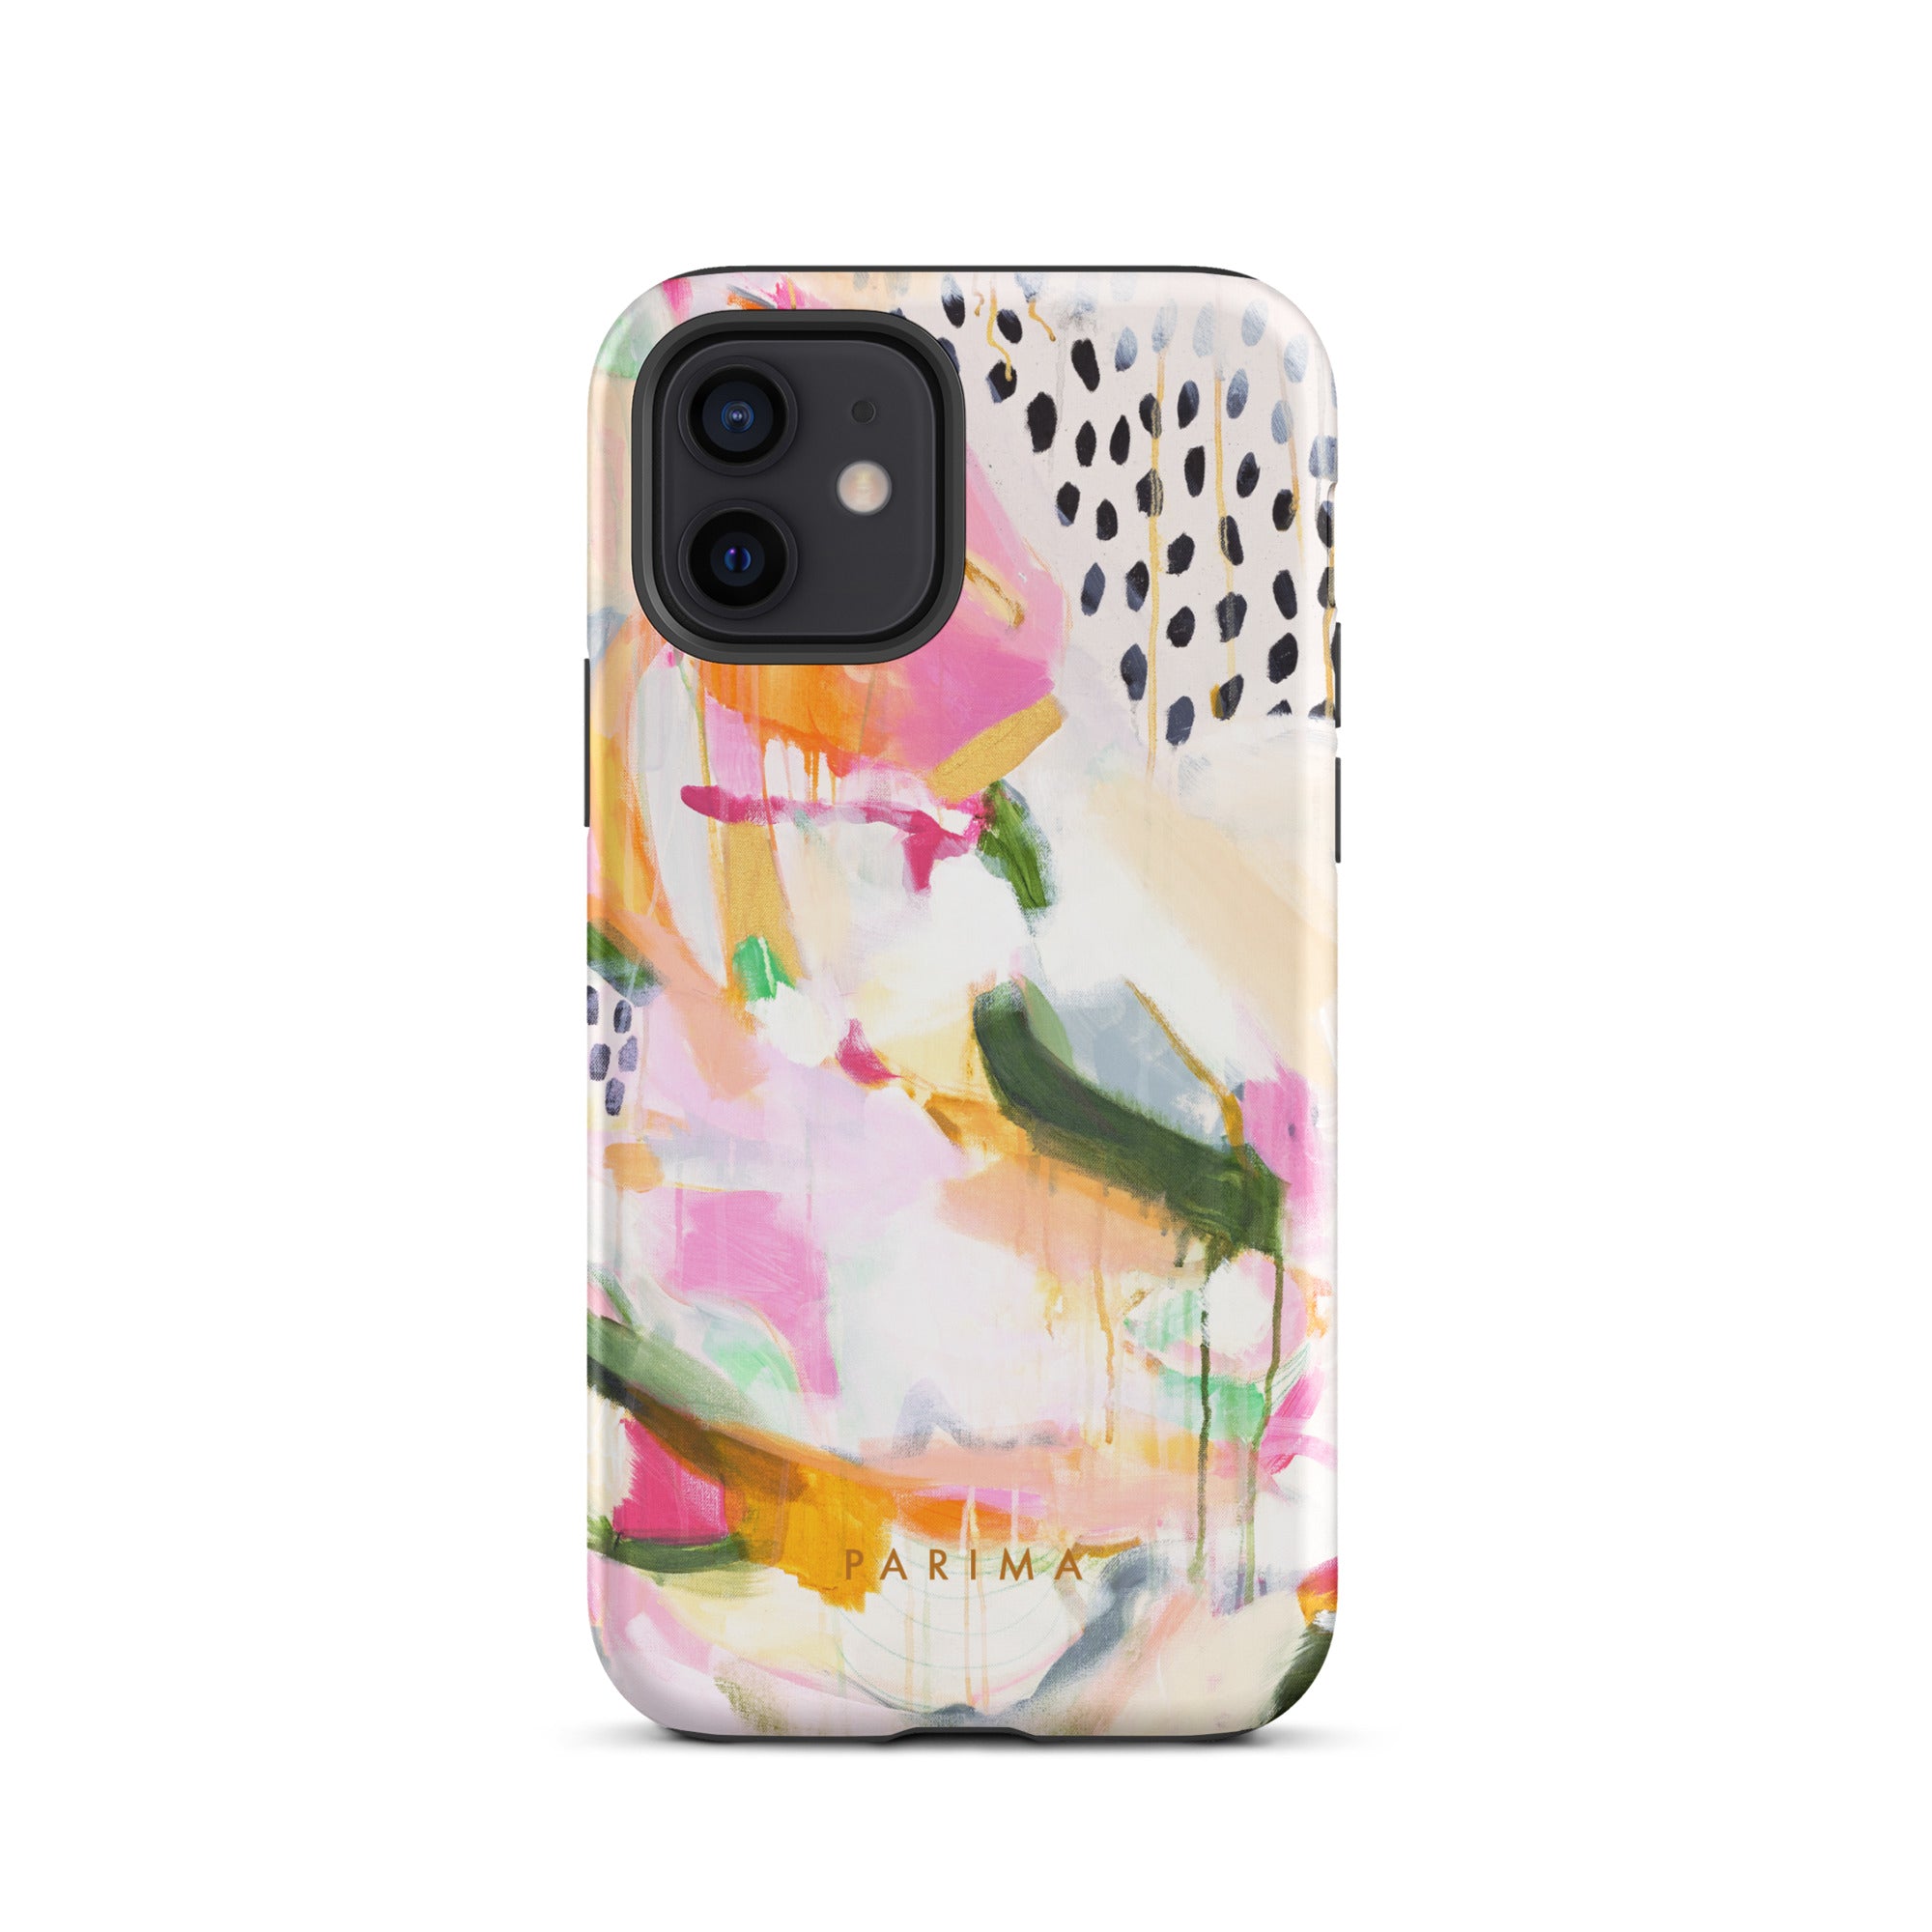 Adira, pink and green abstract art - iPhone 12 tough case by Parima Studio